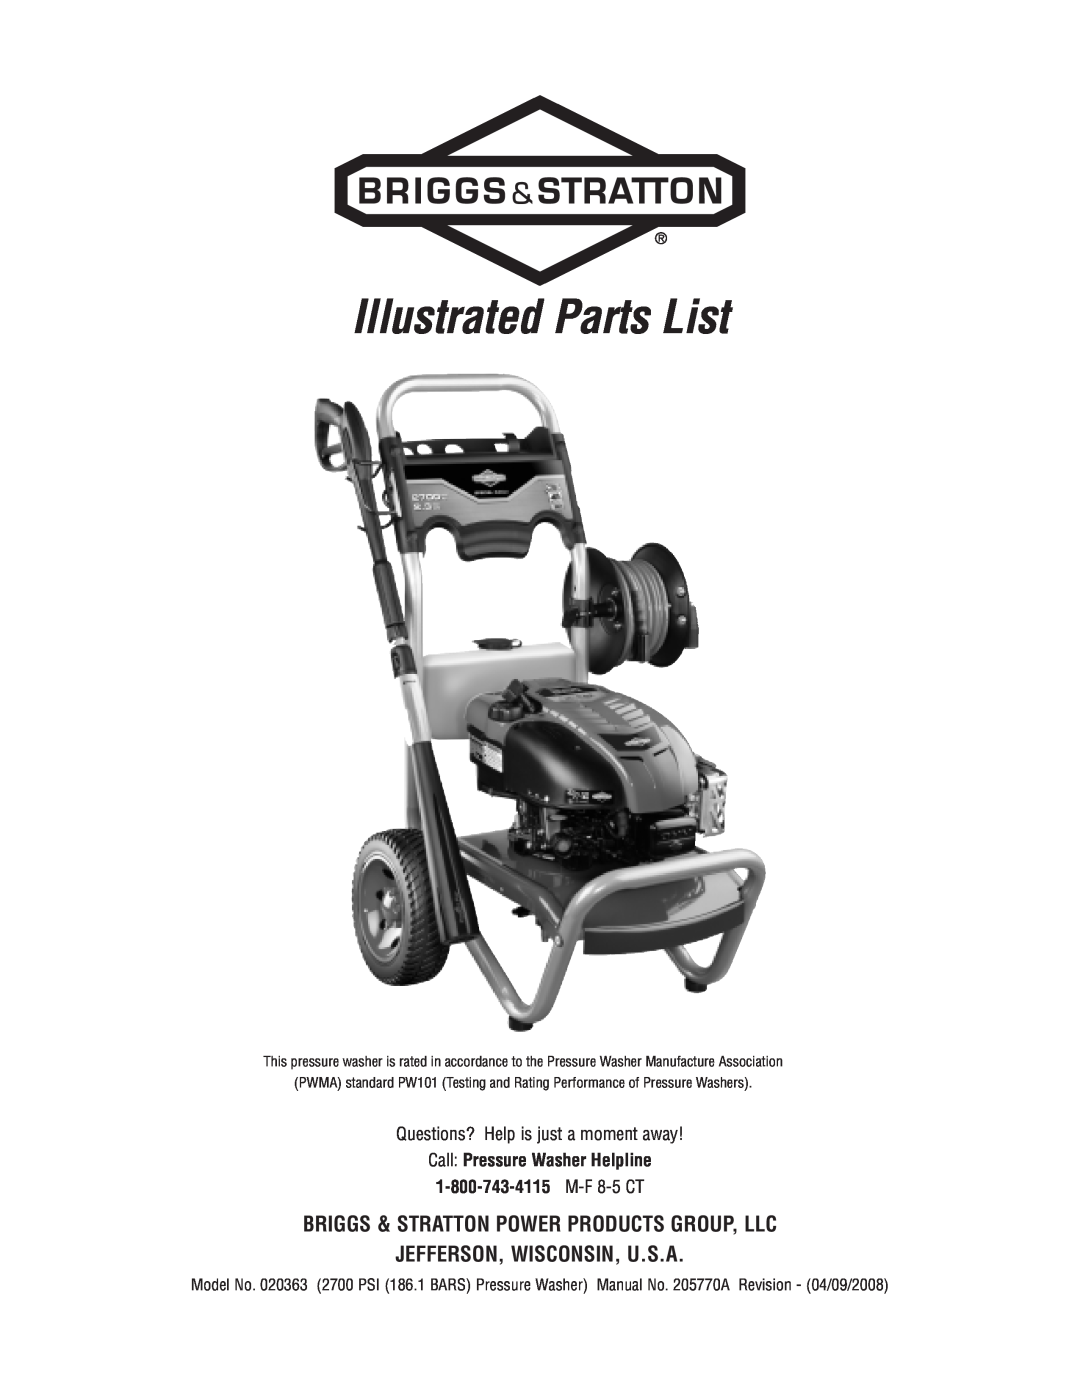 Briggs & Stratton 20363 manual Illustrated Parts List, Briggs & Stratton Power Products Group, Llc 